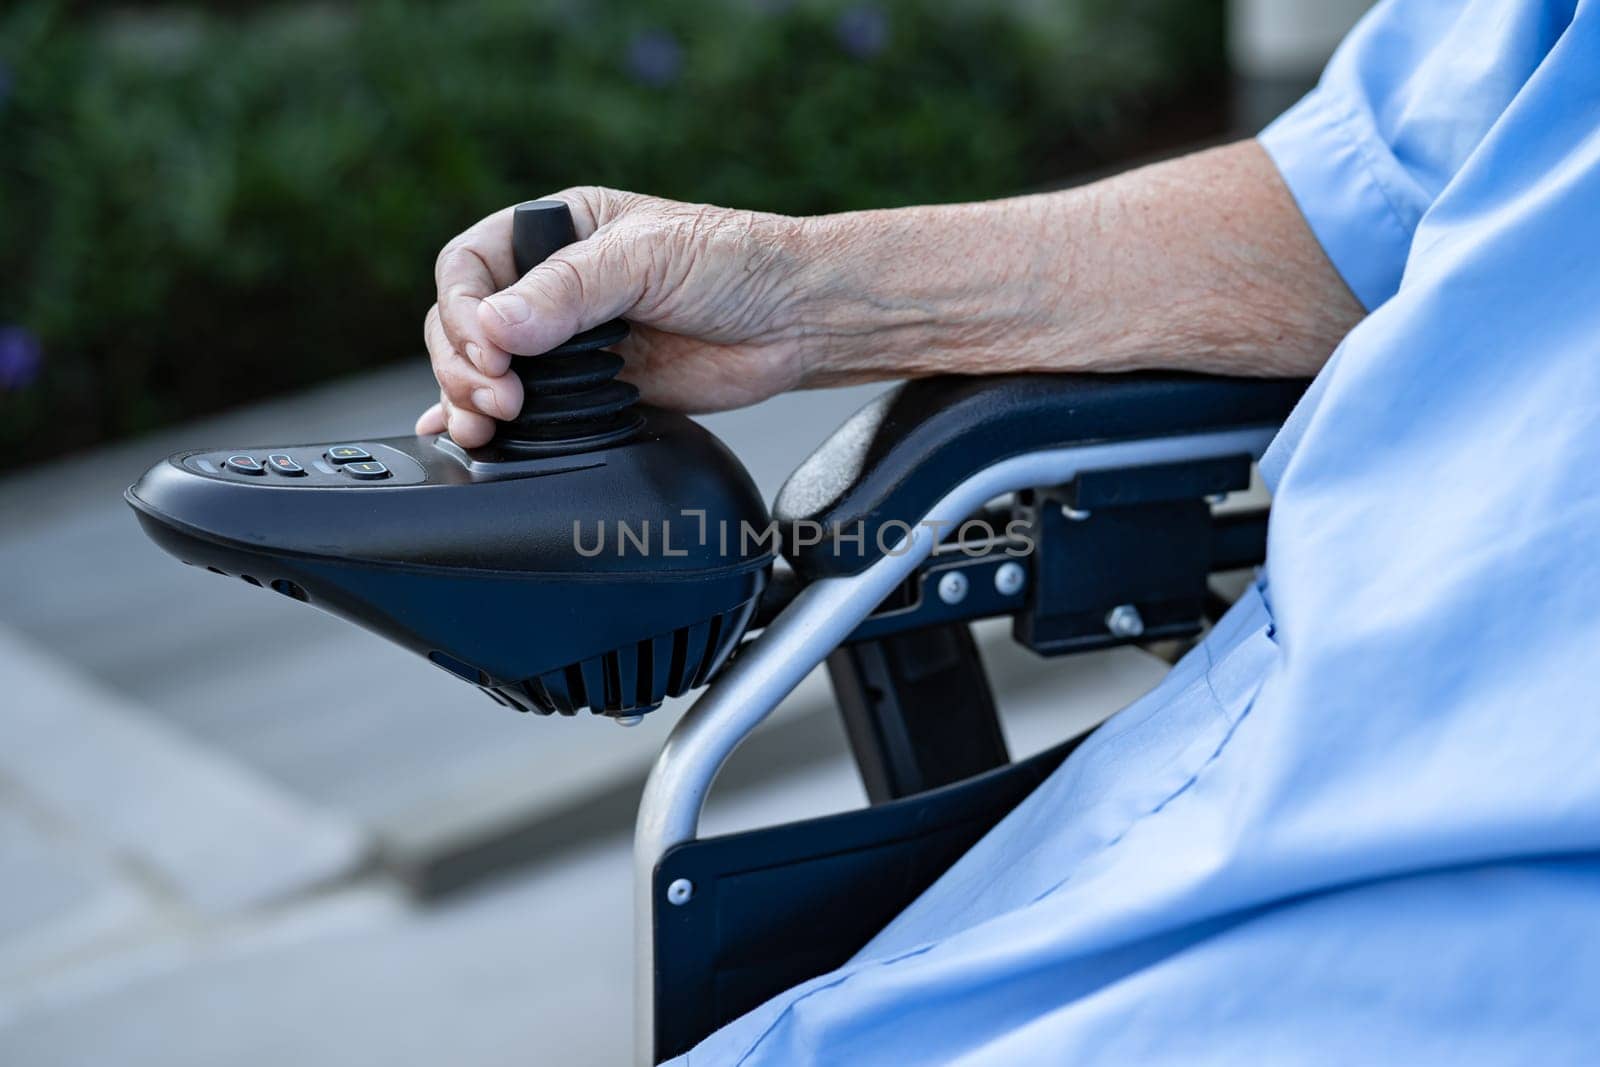 Asian senior woman patient on electric wheelchair with remote control at hospital, healthy strong medical concept. by pamai